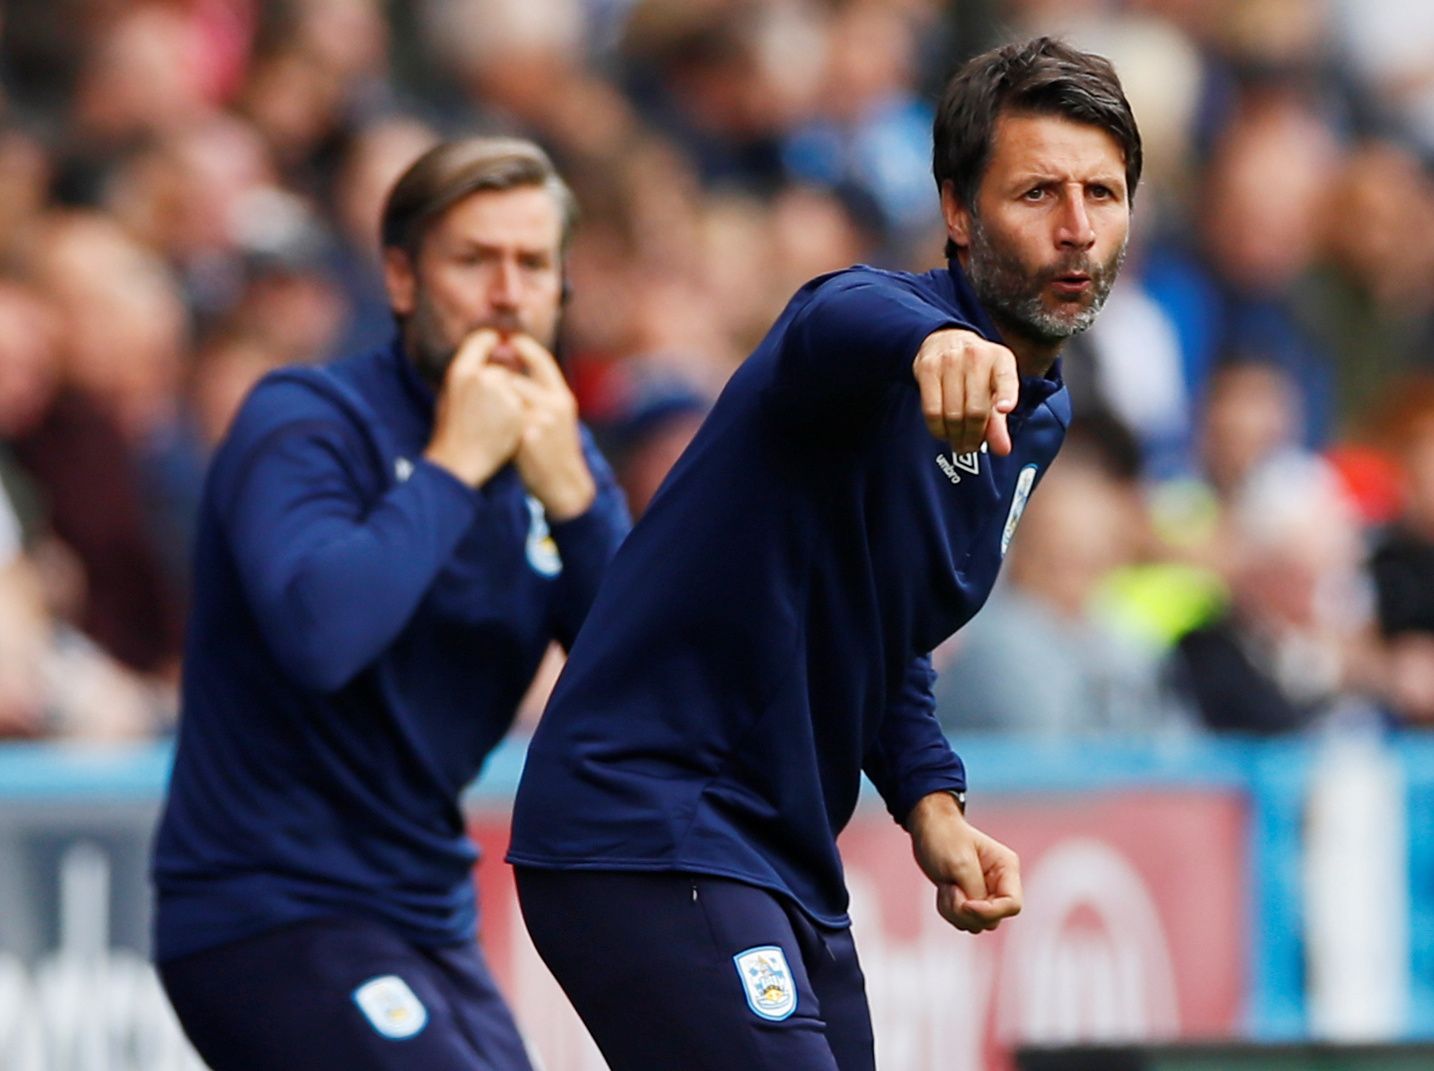 Soccer Football - Championship - Huddersfield Town v Sheffield Wednesday - John Smith's Stadium, Huddersfield, Britain - September 15, 2019   Huddersfield Town manager Danny Cowley and assistant manager Nicky Cowley gesture    Action Images/Jason Cairnduff    EDITORIAL USE ONLY. No use with unauthorized audio, video, data, fixture lists, club/league logos or "live" services. Online in-match use limited to 75 images, no video emulation. No use in betting, games or single club/league/player public